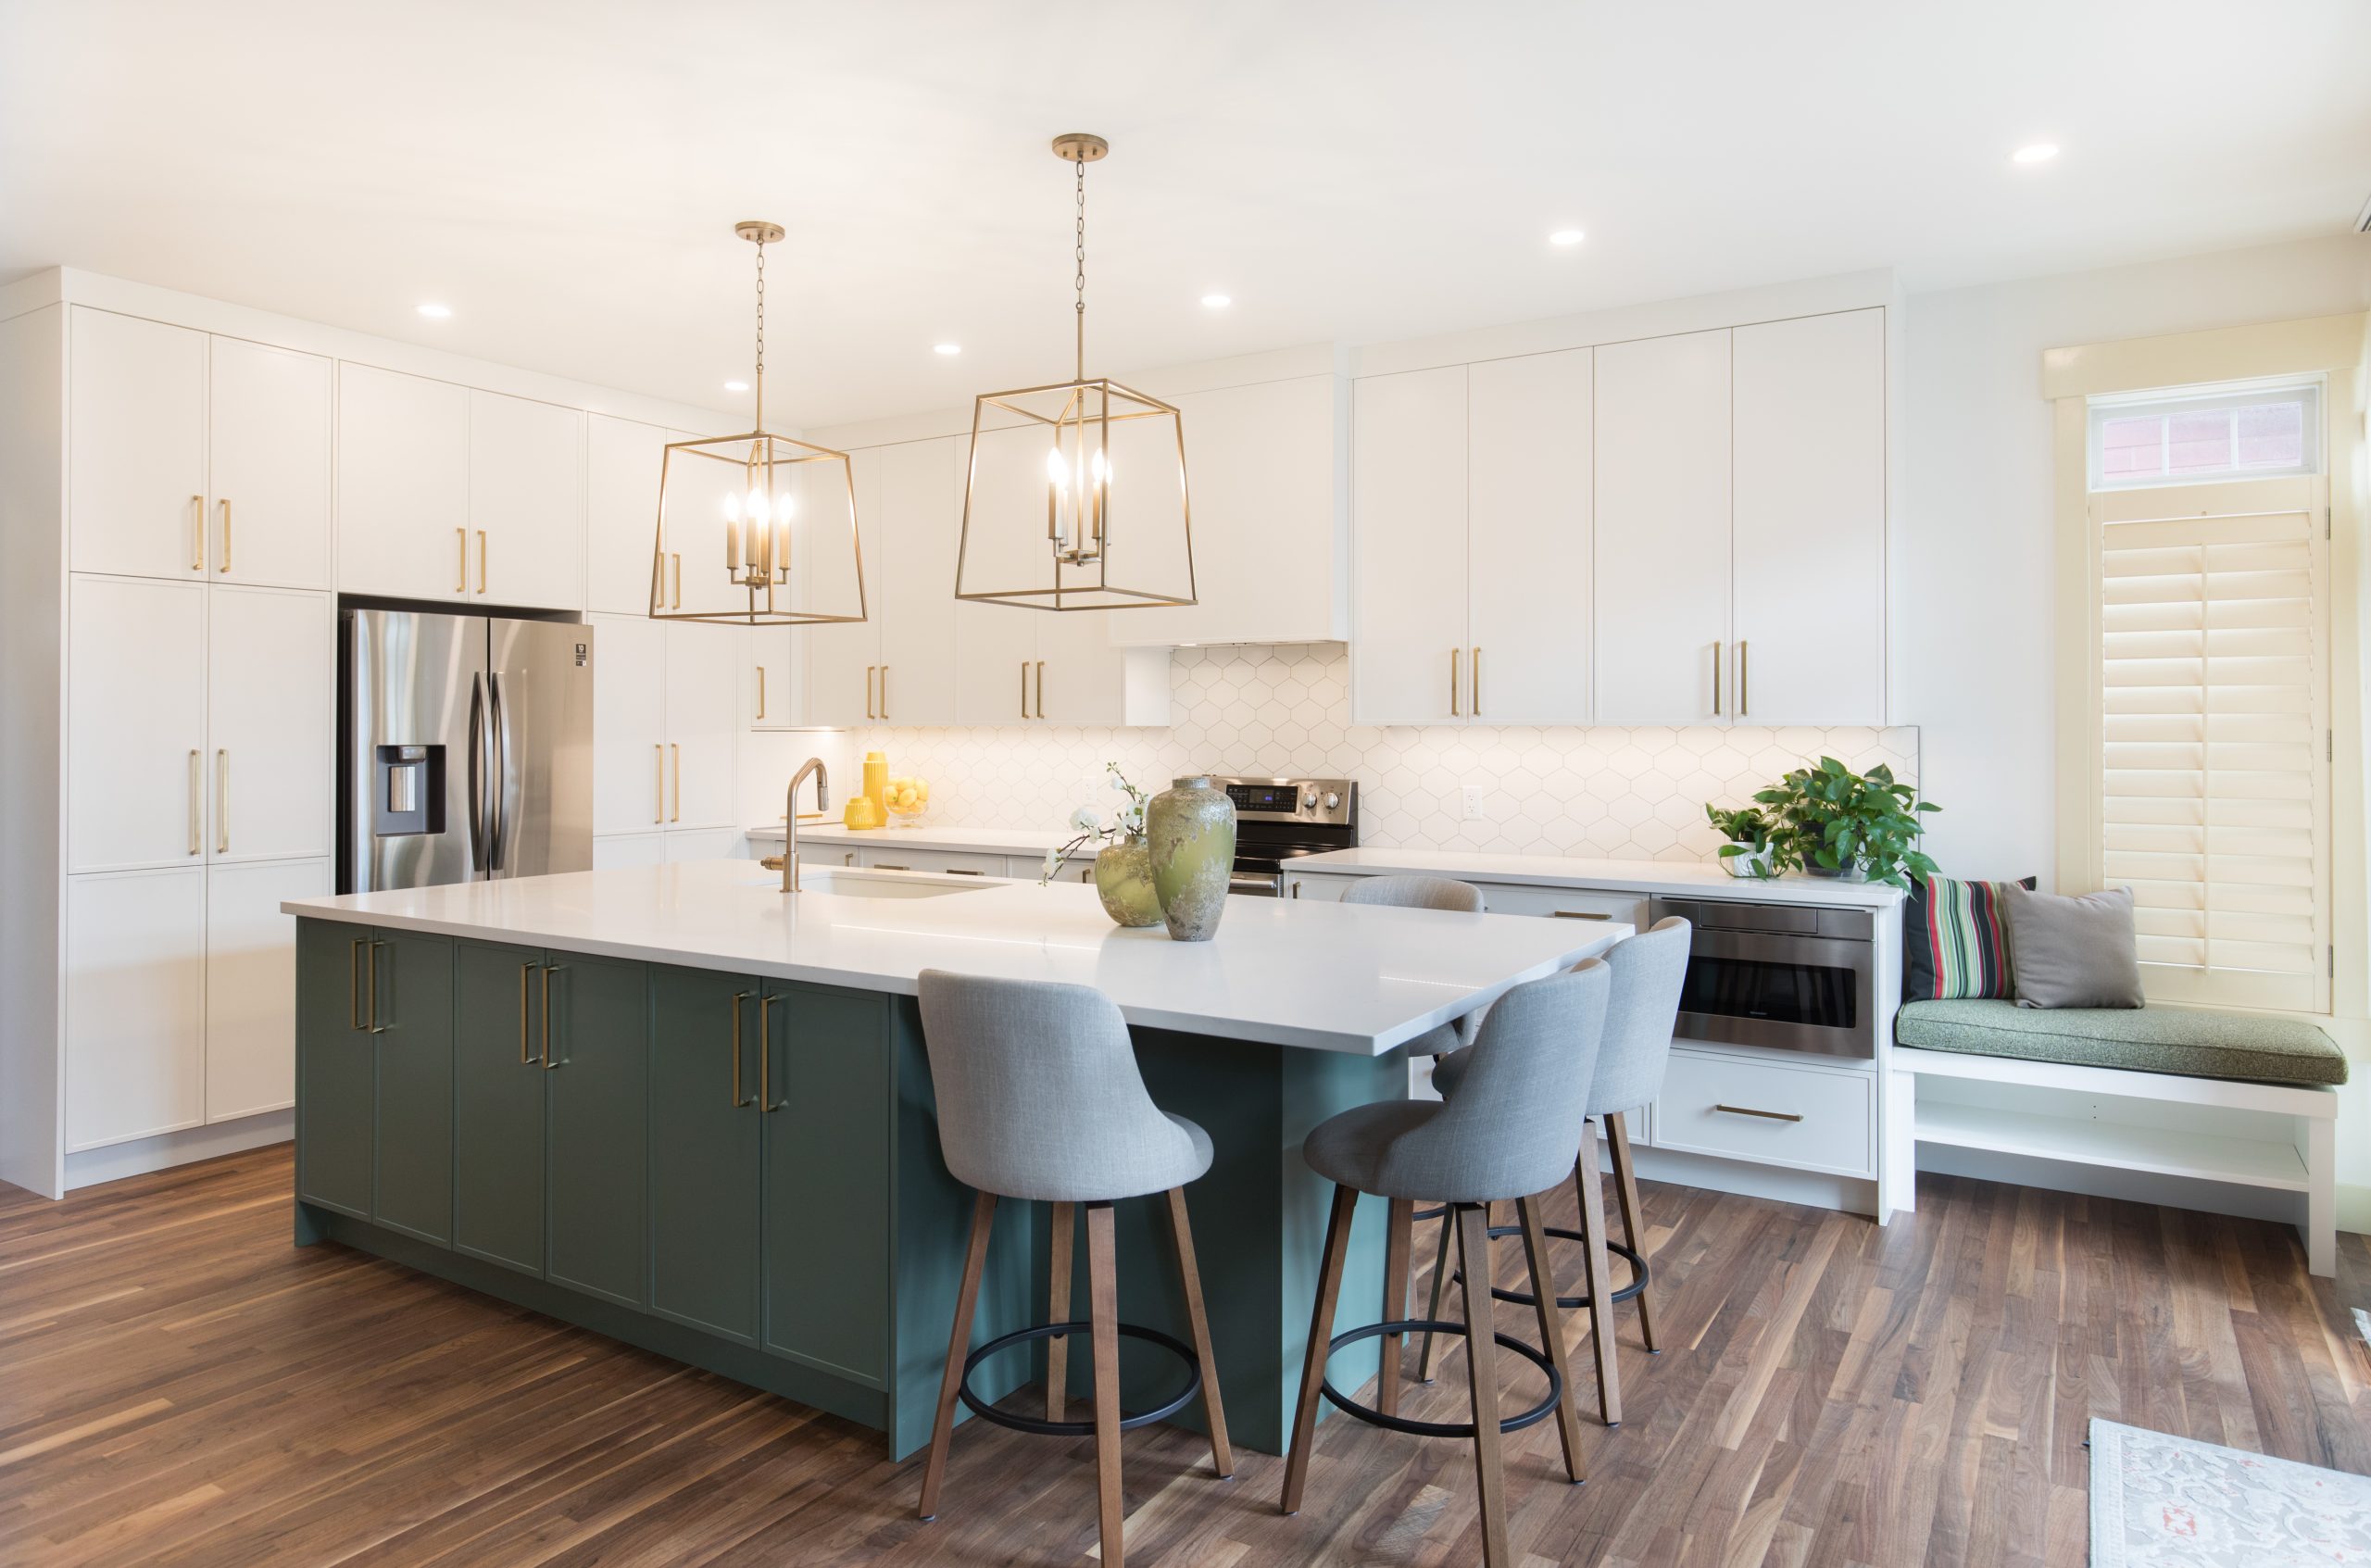 Beautiful white and green kitchen with kitchen island, bar seating, and gold pendant lights and hardware